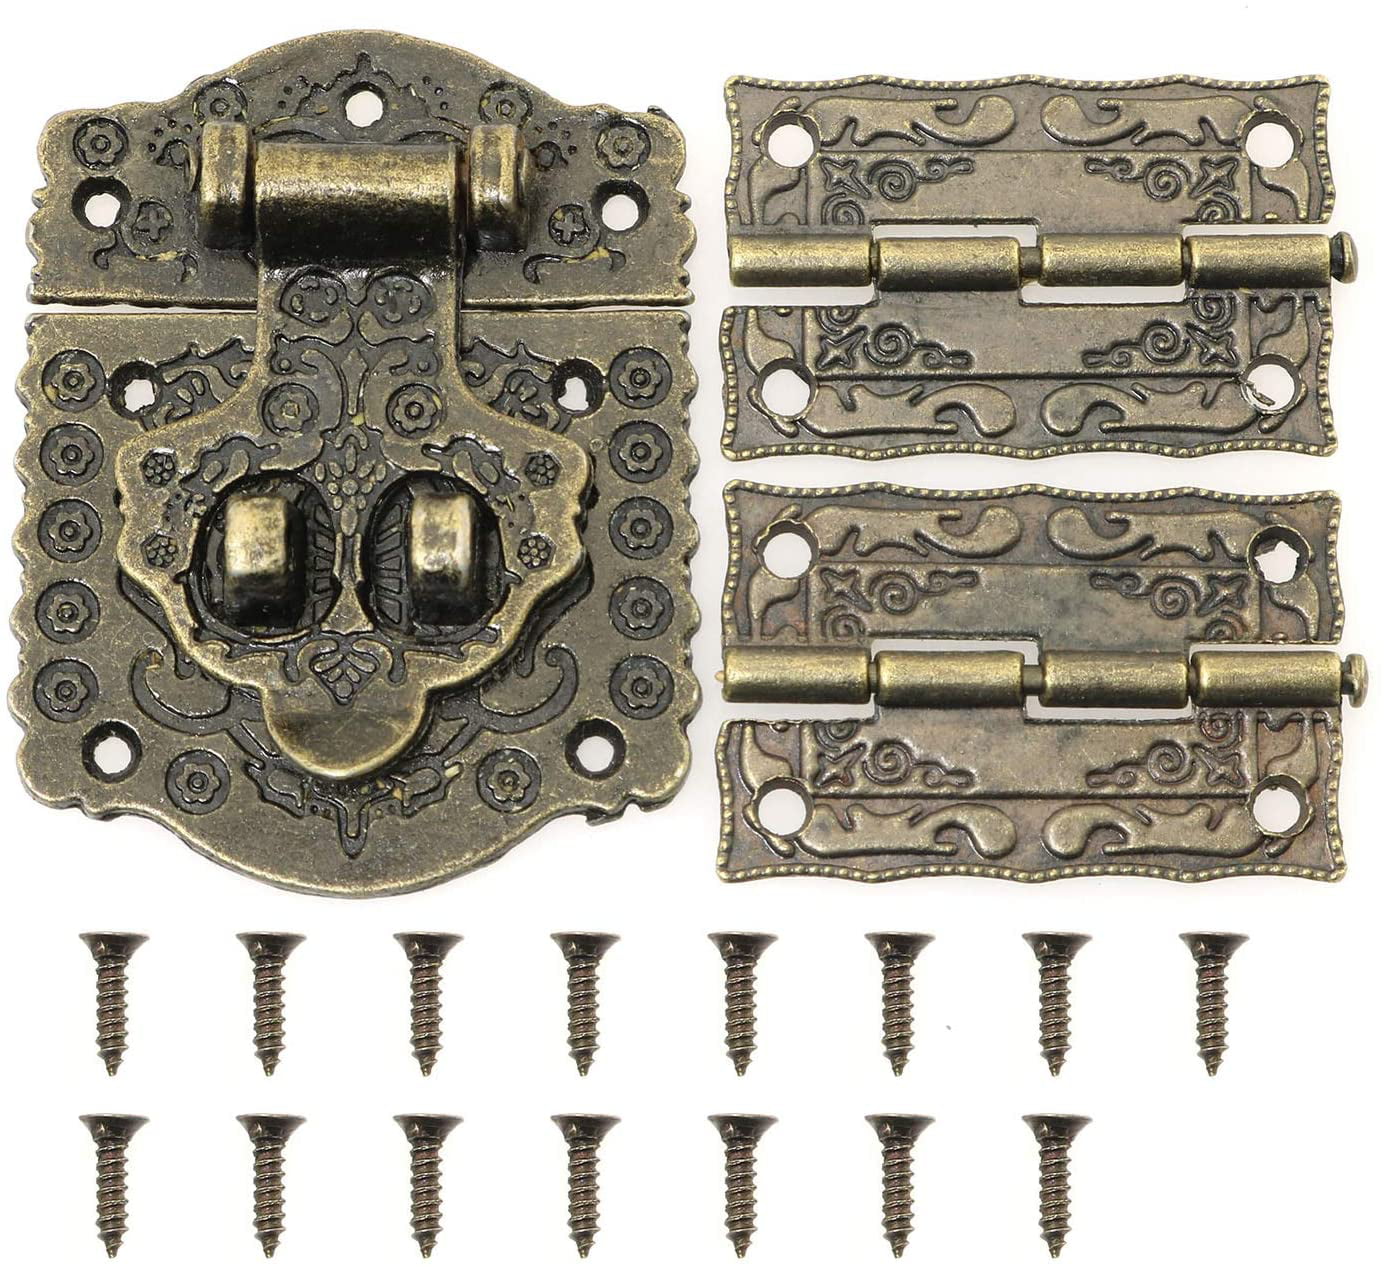 6 Pcs Latch Hasp Antique Embossing Hasp Latch Clasp Lock with Screws 2 Sizes Vintage Decorative Latches Hasp for Jewelry Box Cabinet Furniture